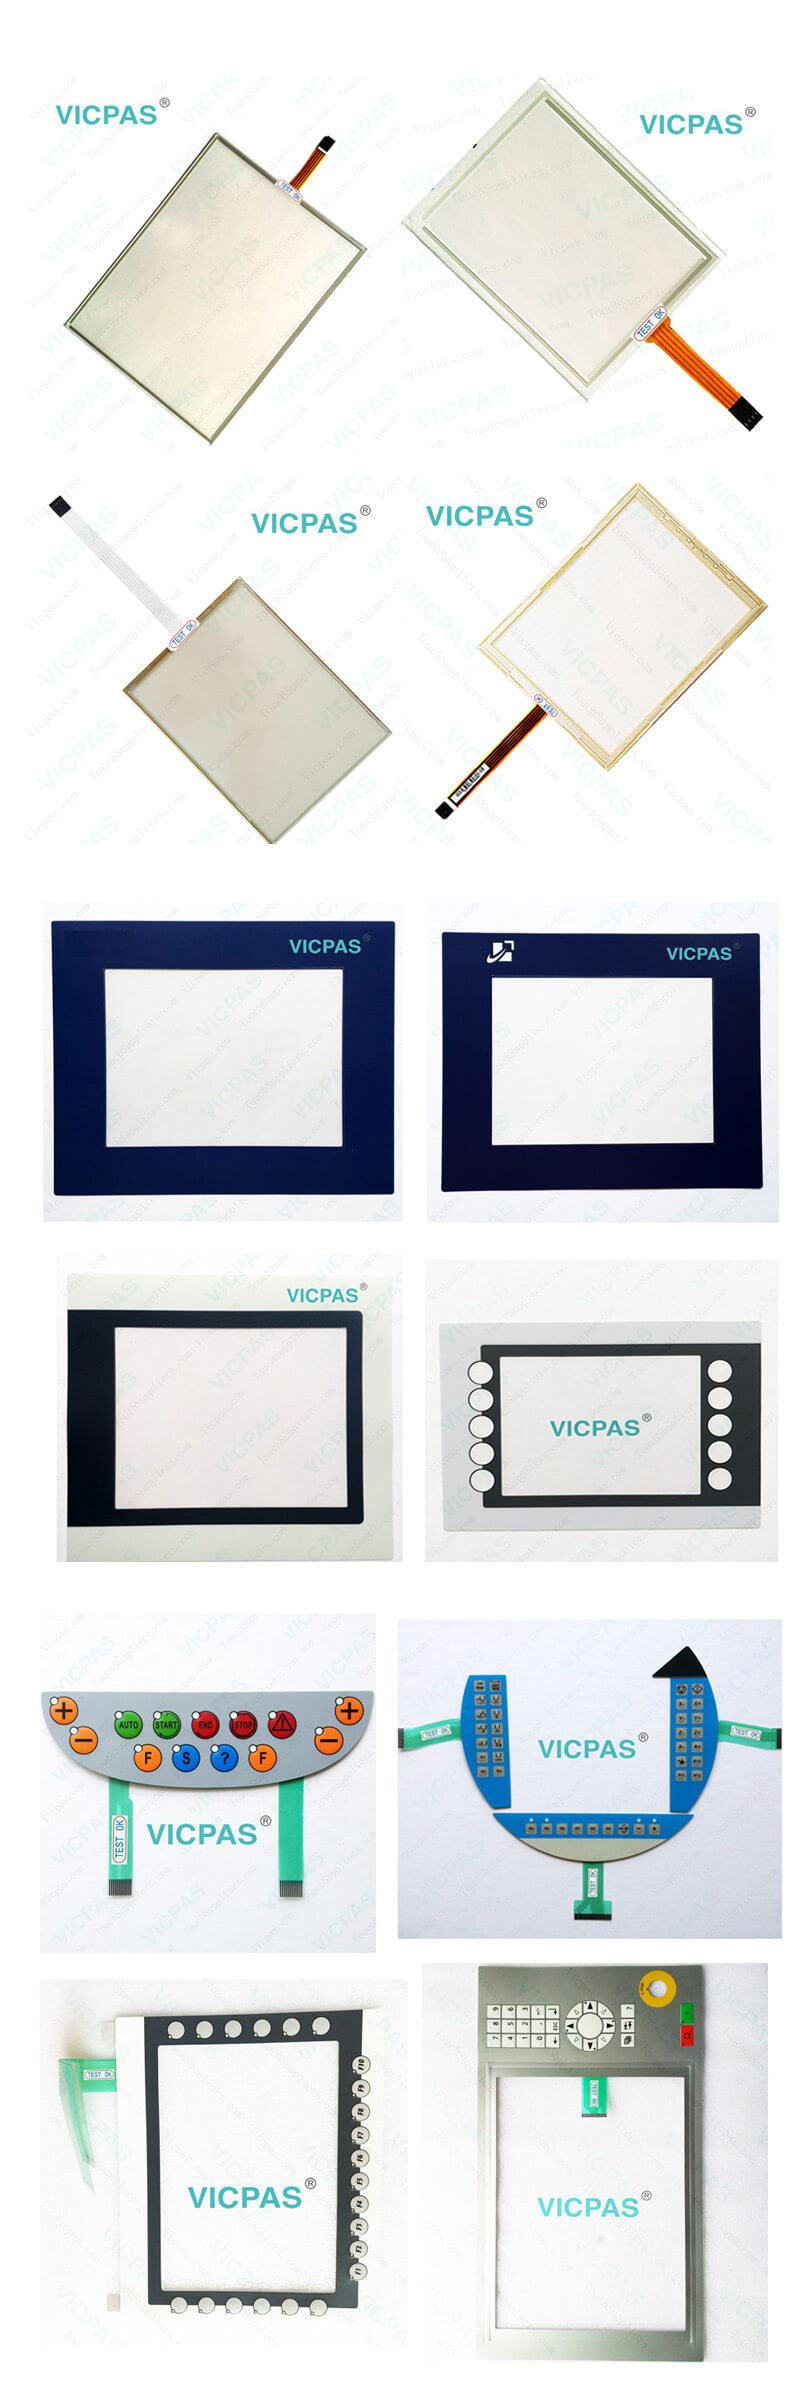 5PC720.1214-K06 touch screen